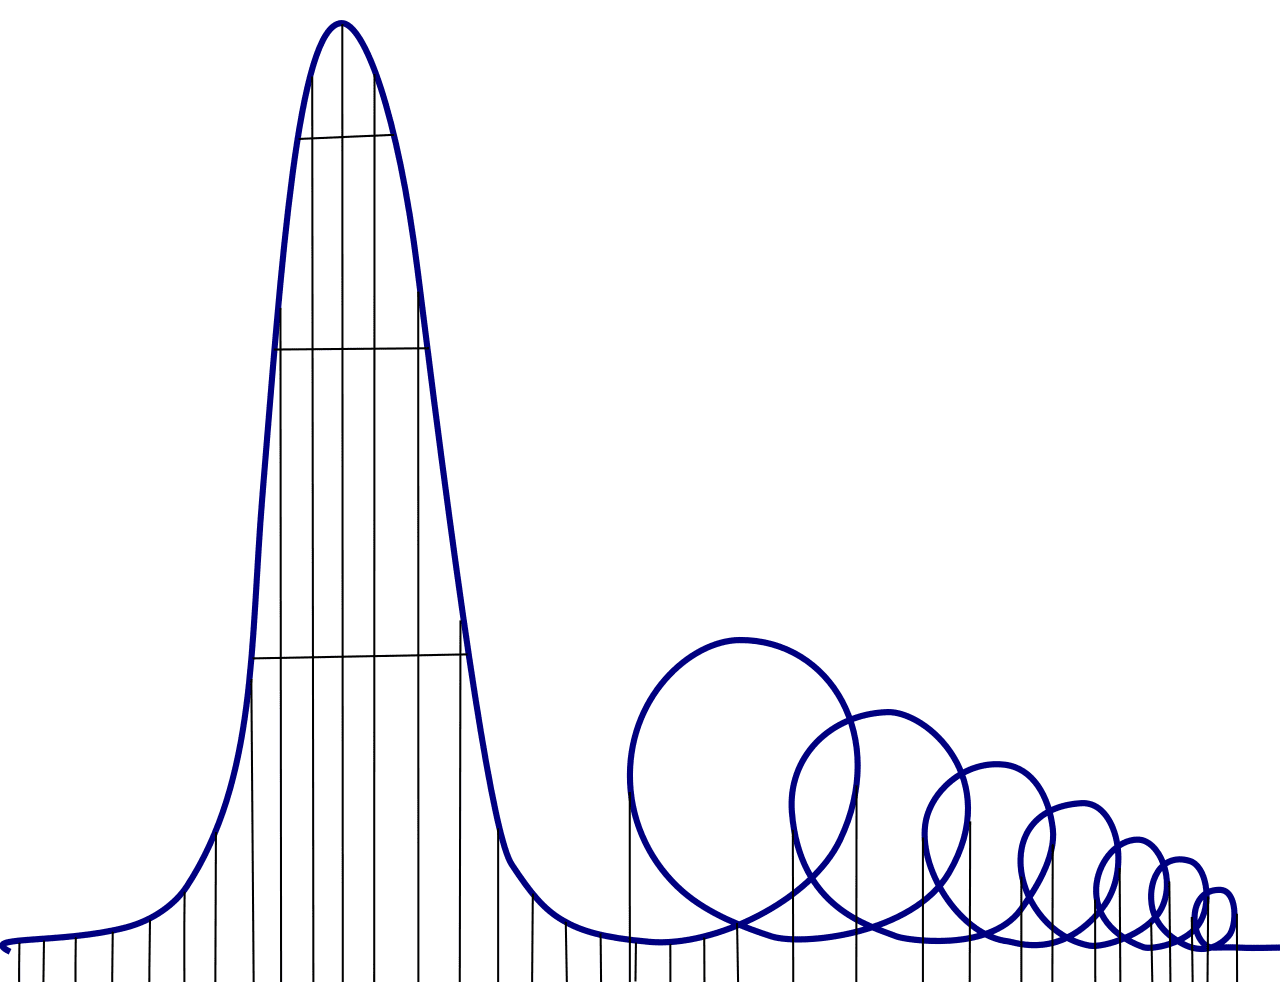 The lift hill and the seven loops of the Euthanasia Coaster, in profile.